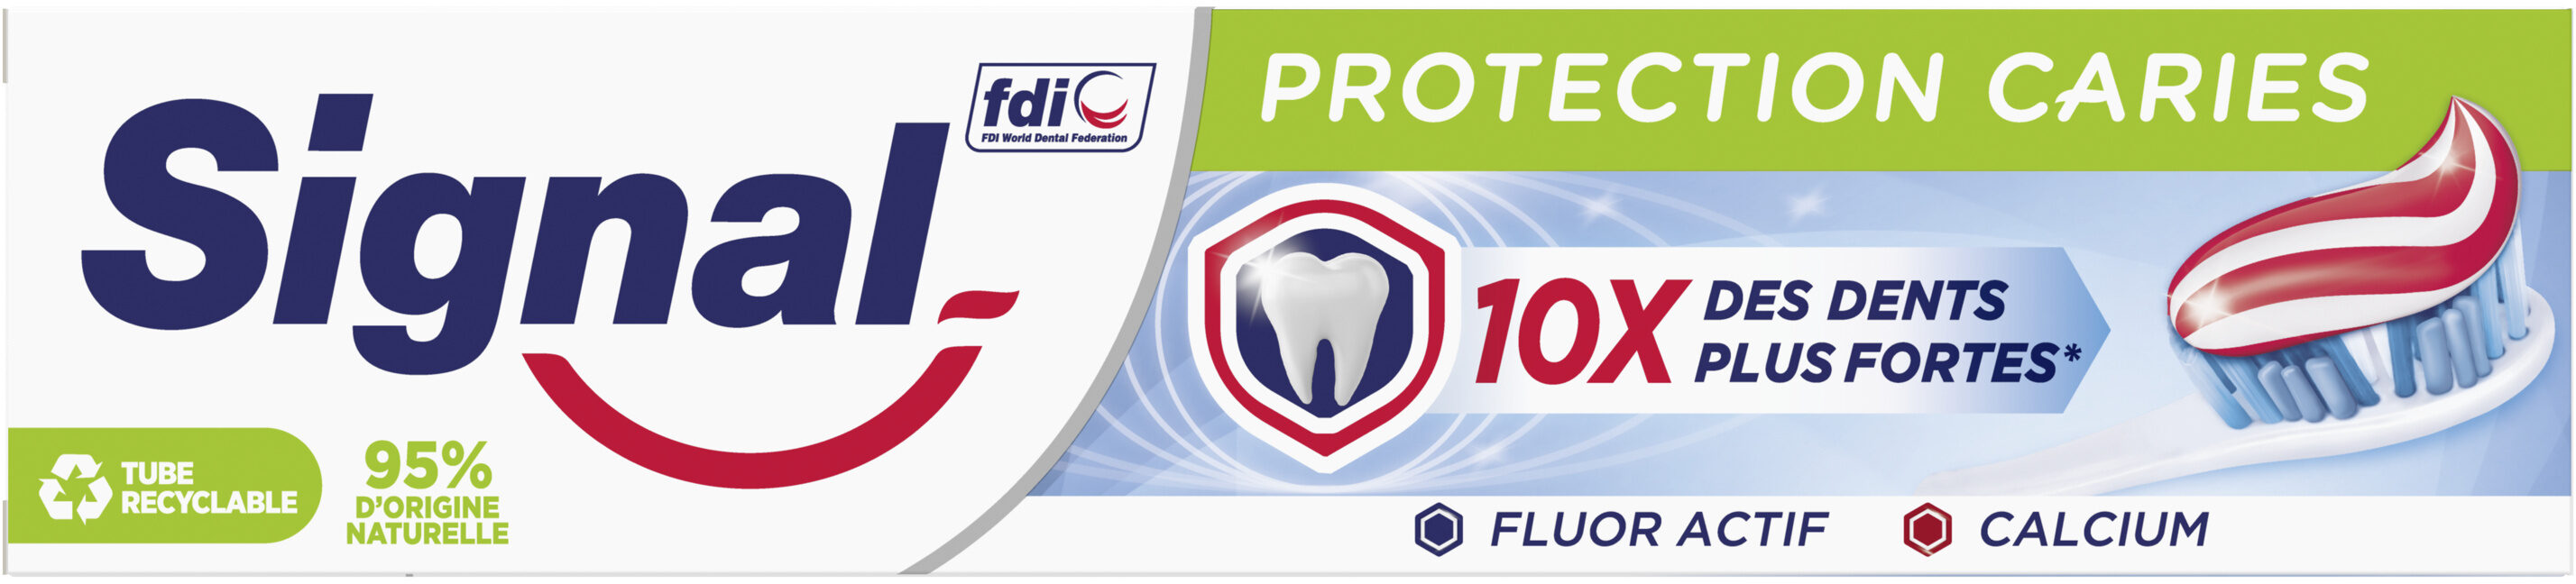 Signal Dentifrice Protection Caries 125ml - Produto - fr